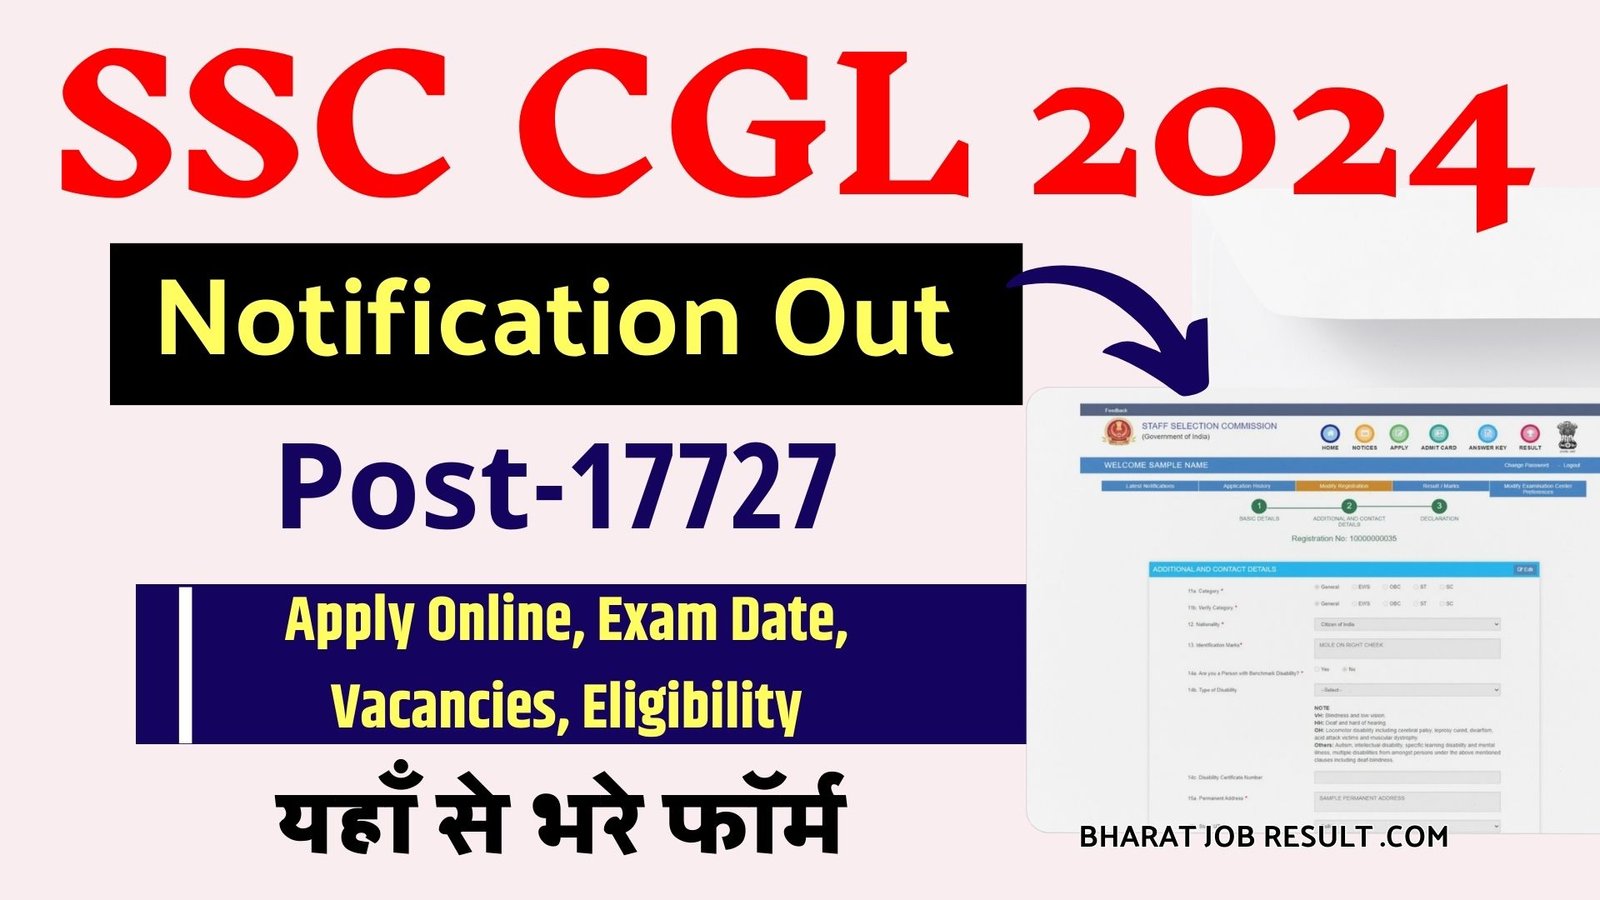 SSC CGL 2024: Notification Out for 17727 Posts, Apply Online, Exam Date, Vacancies, Eligibility